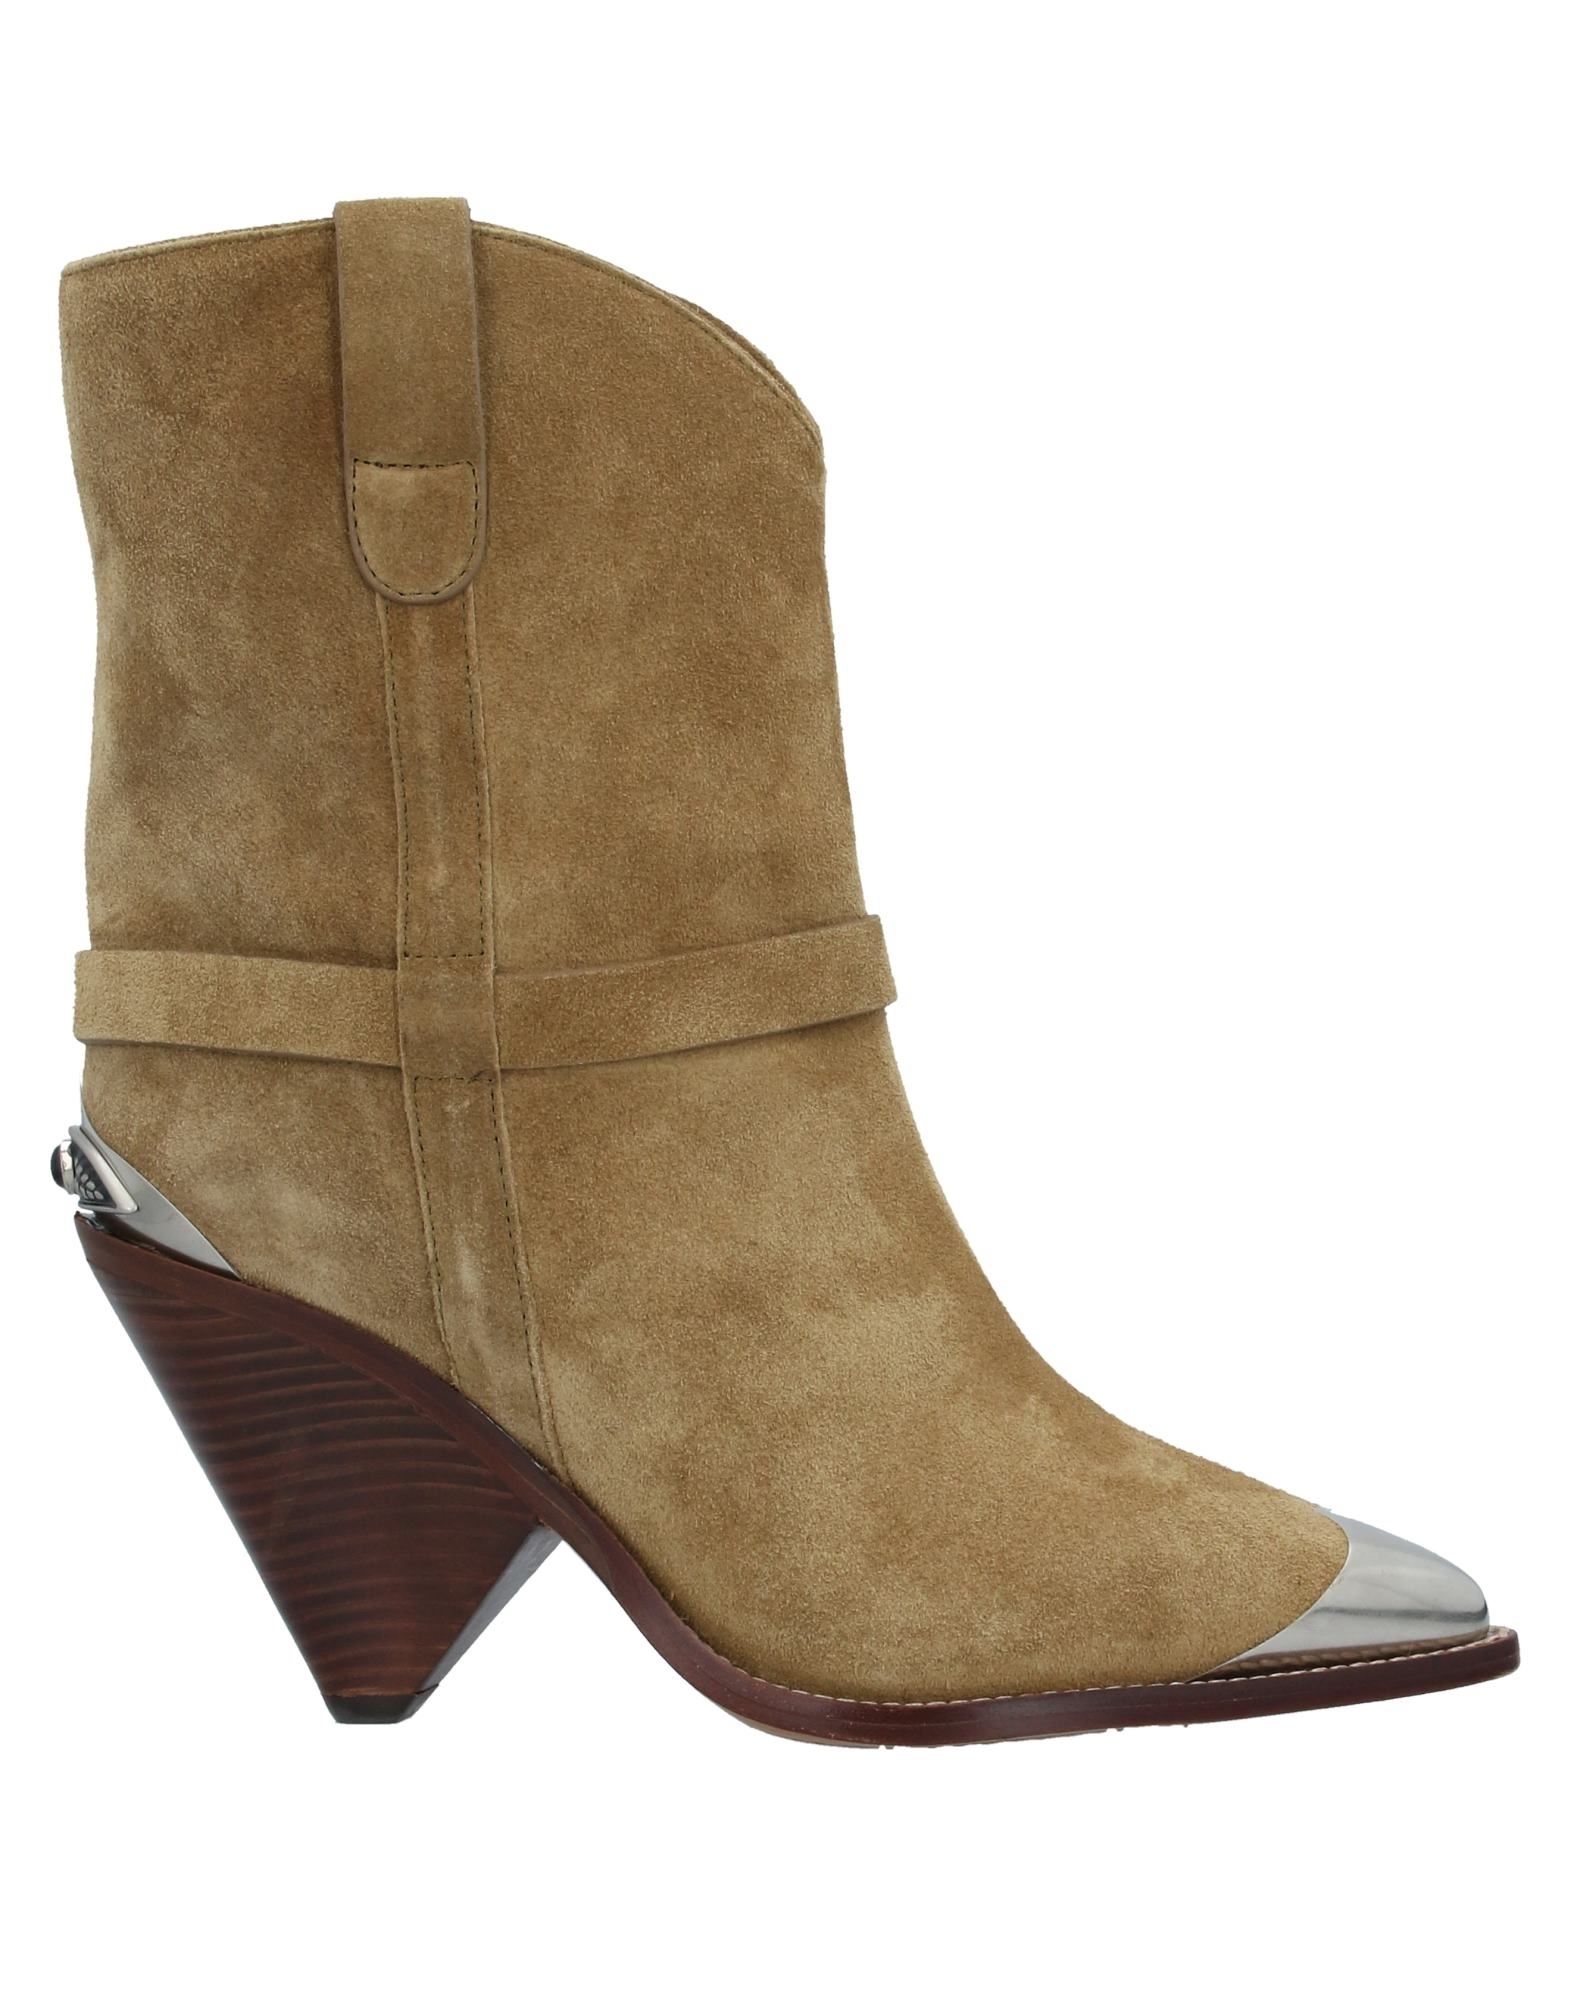 ISABEL MARANT Ankle boots - Item 11966797